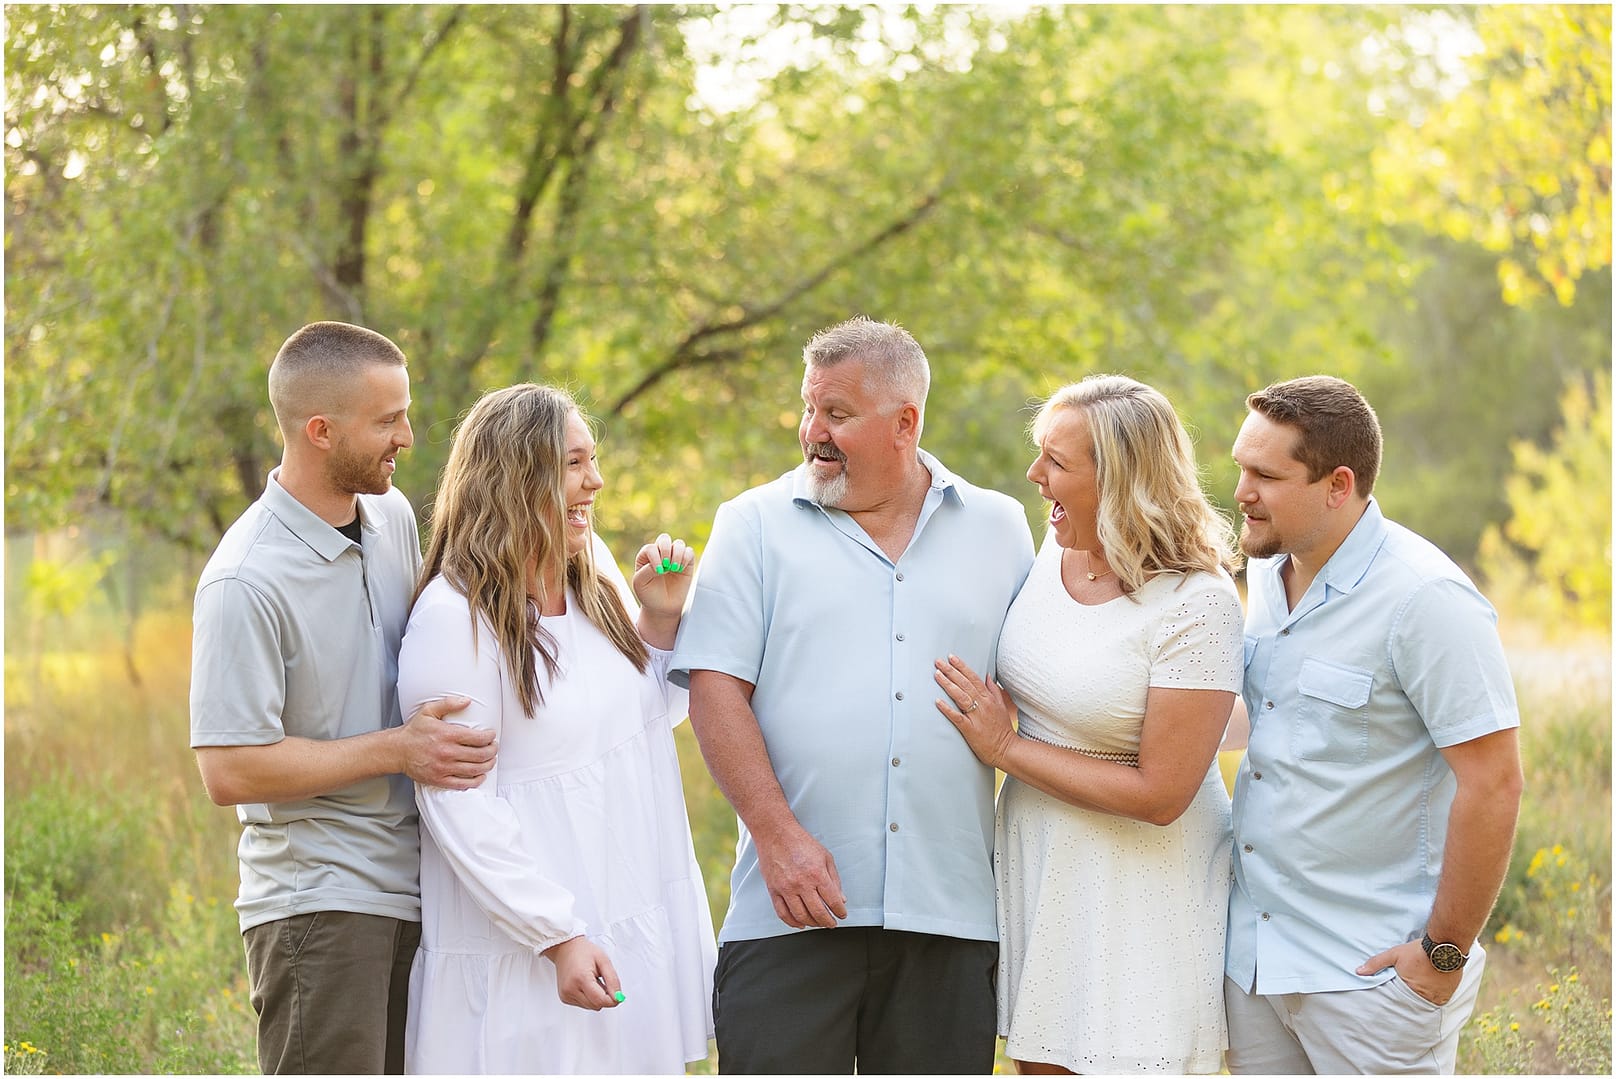 Daughter surprises family with pregnancy announcement during Boise family photo session. Photo by Tiffany Hix Photography.